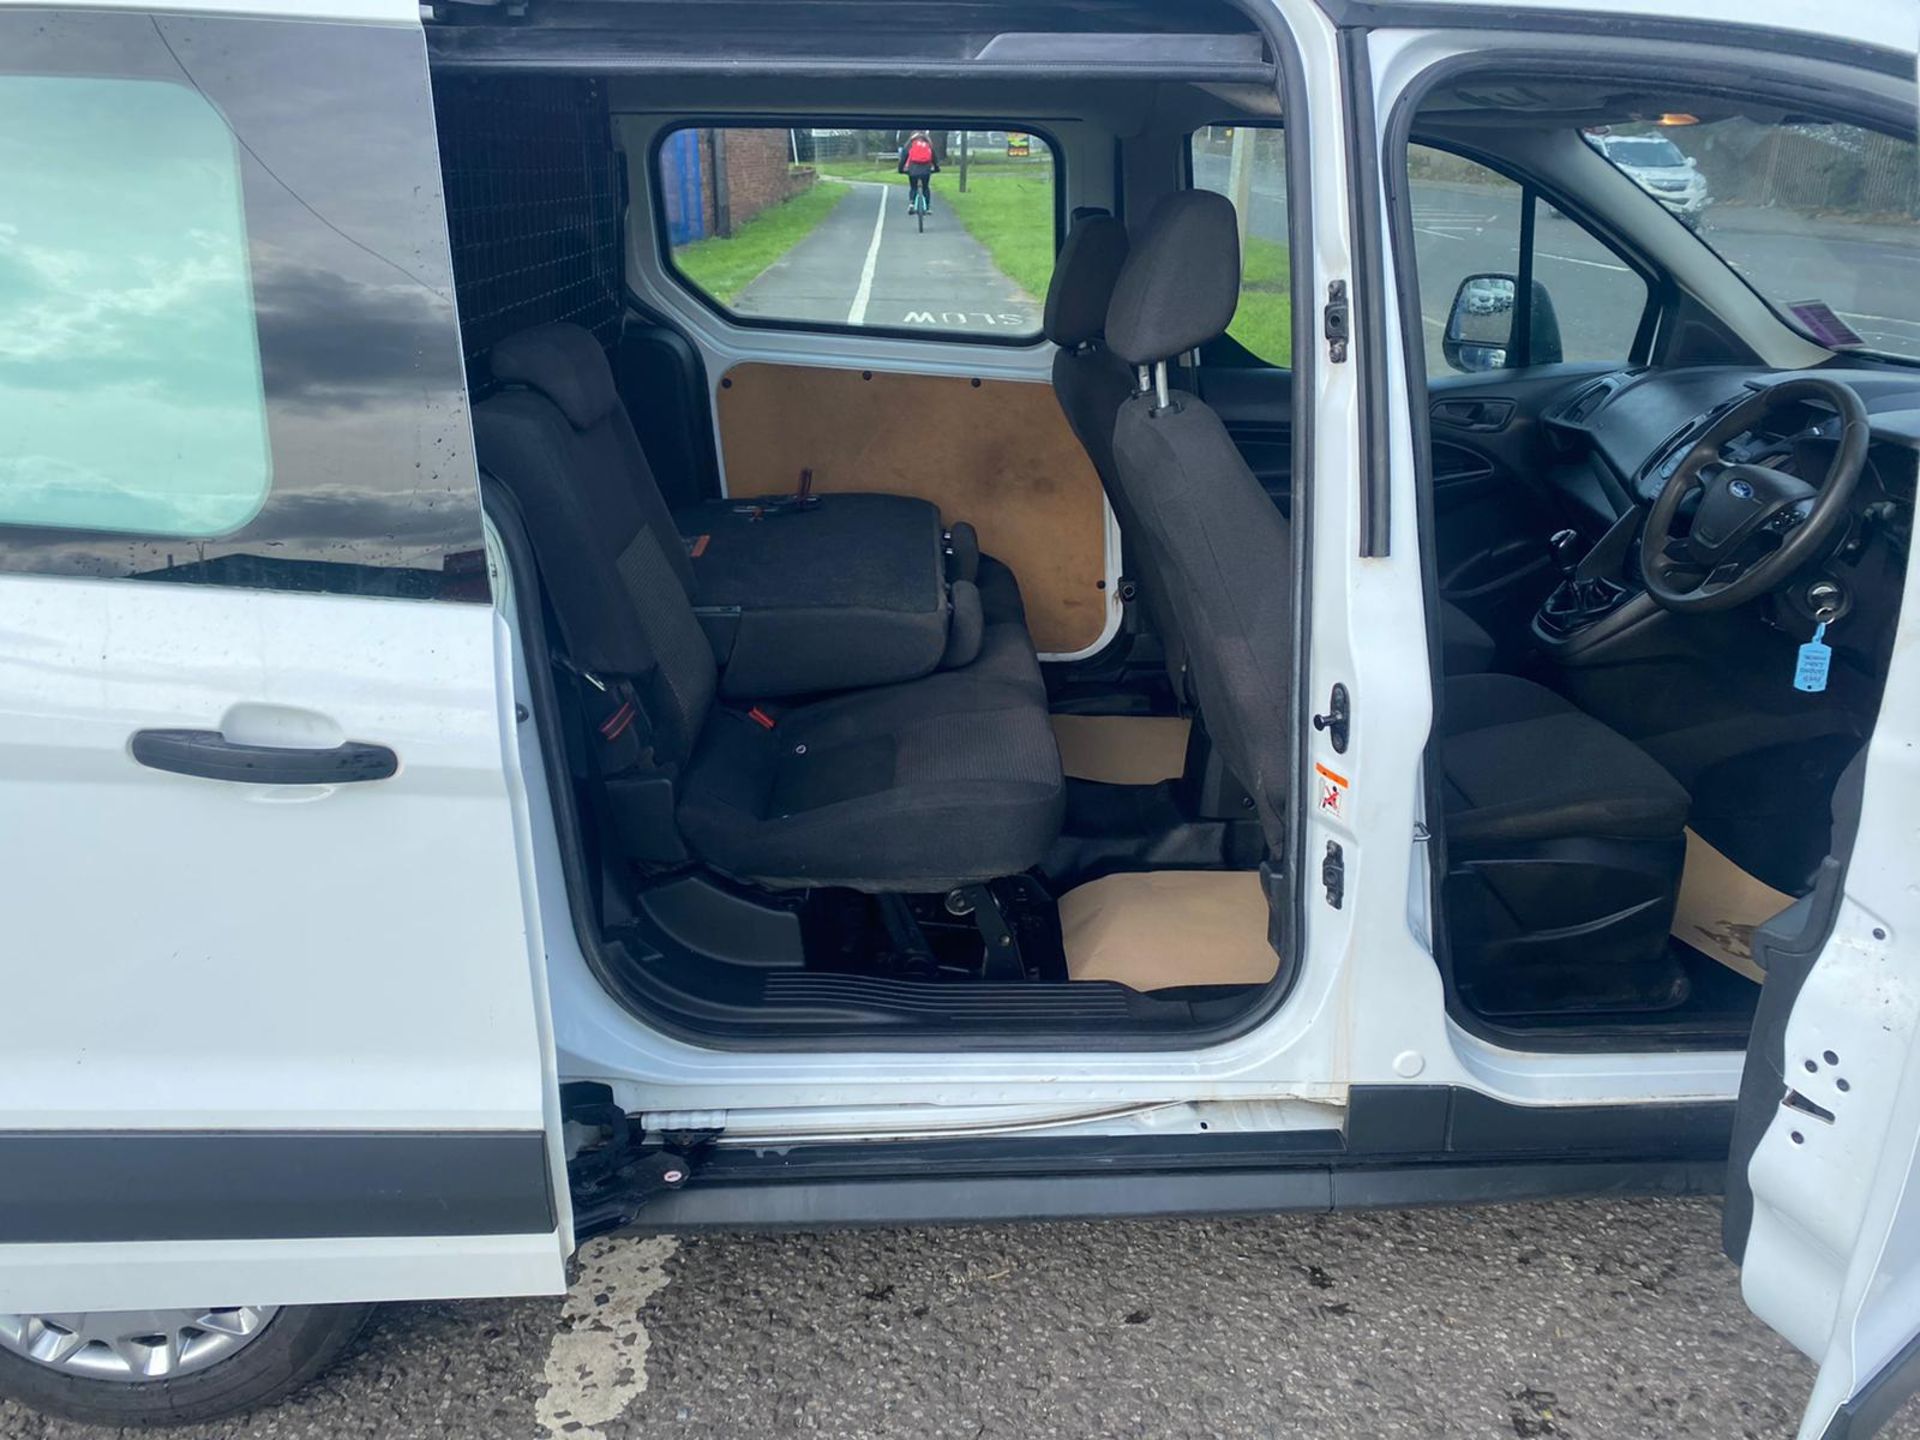 2017 17 FORD TRANSIT CONNECT DOUBLE CAB PANEL VAN - 118K MILES - 5 SEATS - LWB - EURO 6. - Image 9 of 11